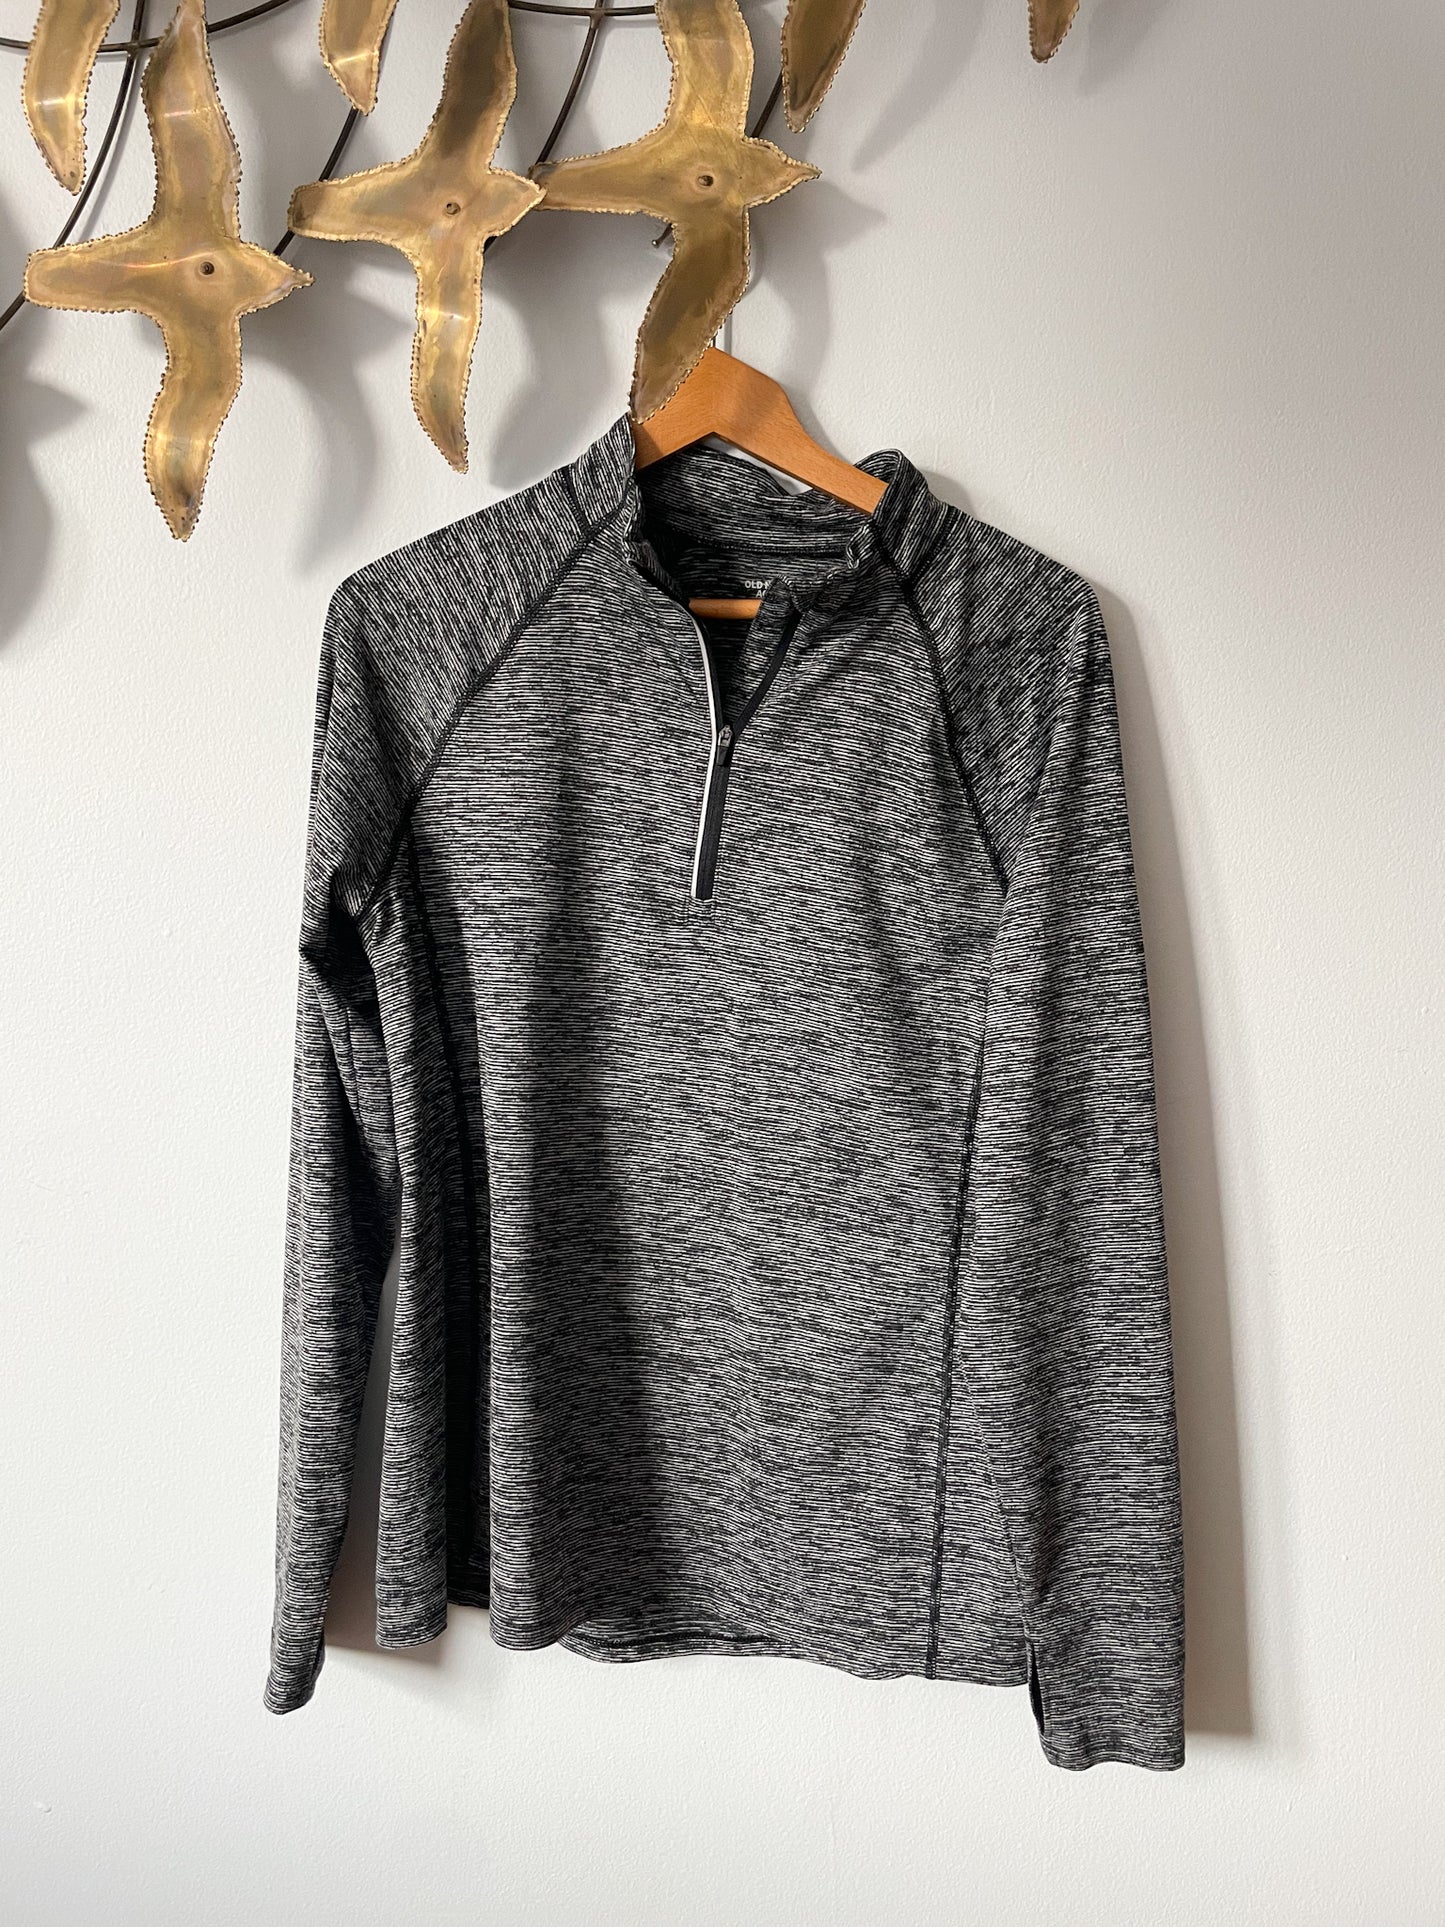 Old Navy Grey Quarter-Zip Performance Reflective Long Sleeve Top - Large